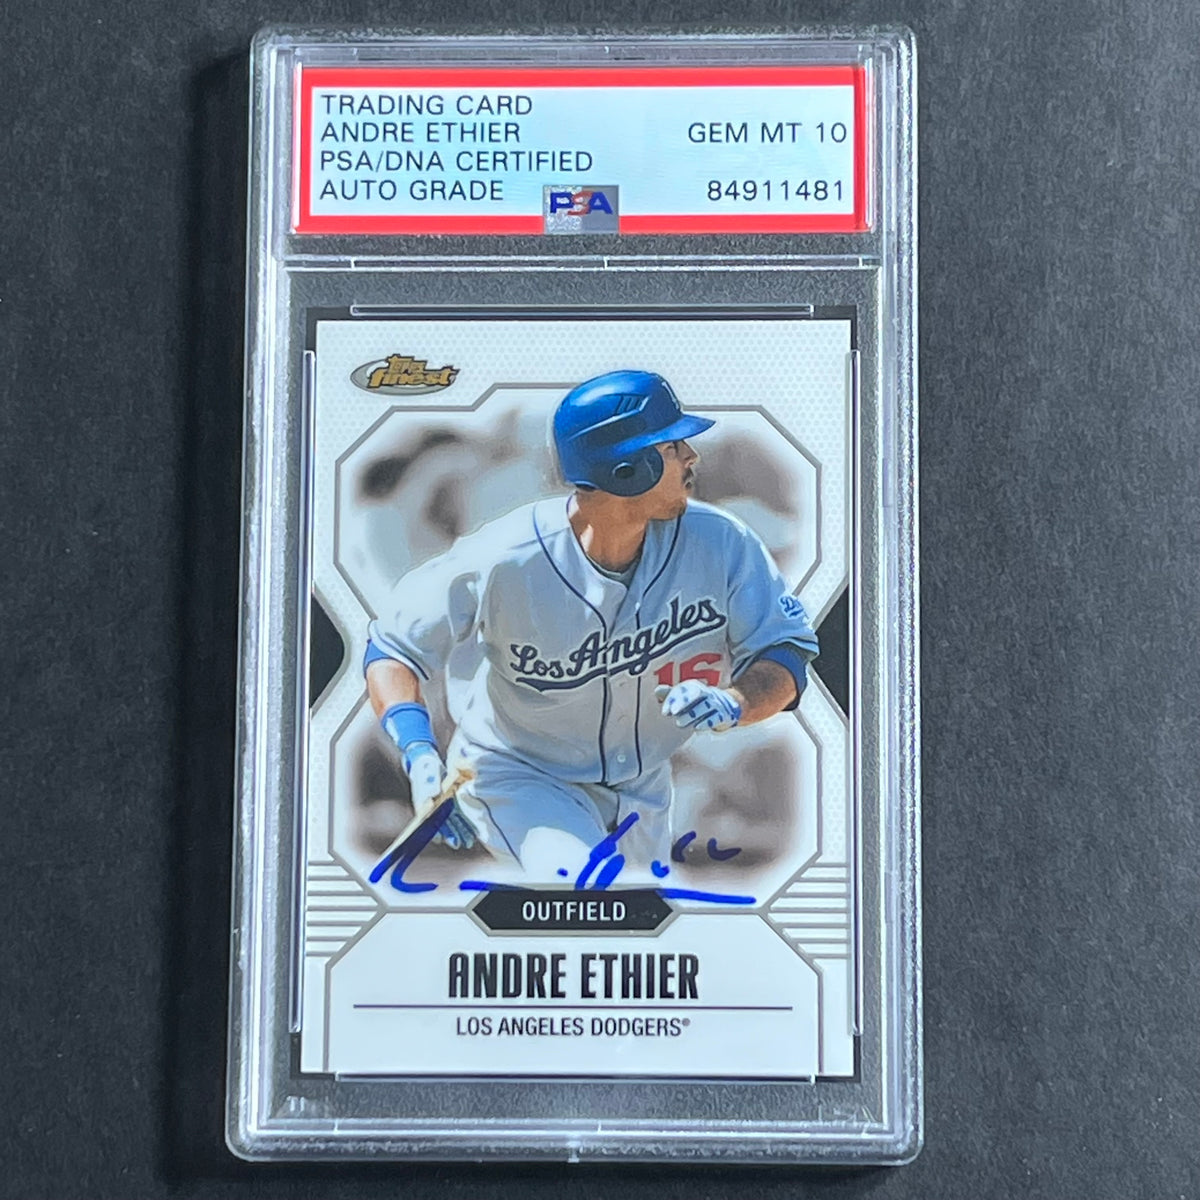 2007 Topps Finest #9 Andre Ethier Signed Card AUTO 10 PSA Slabbed